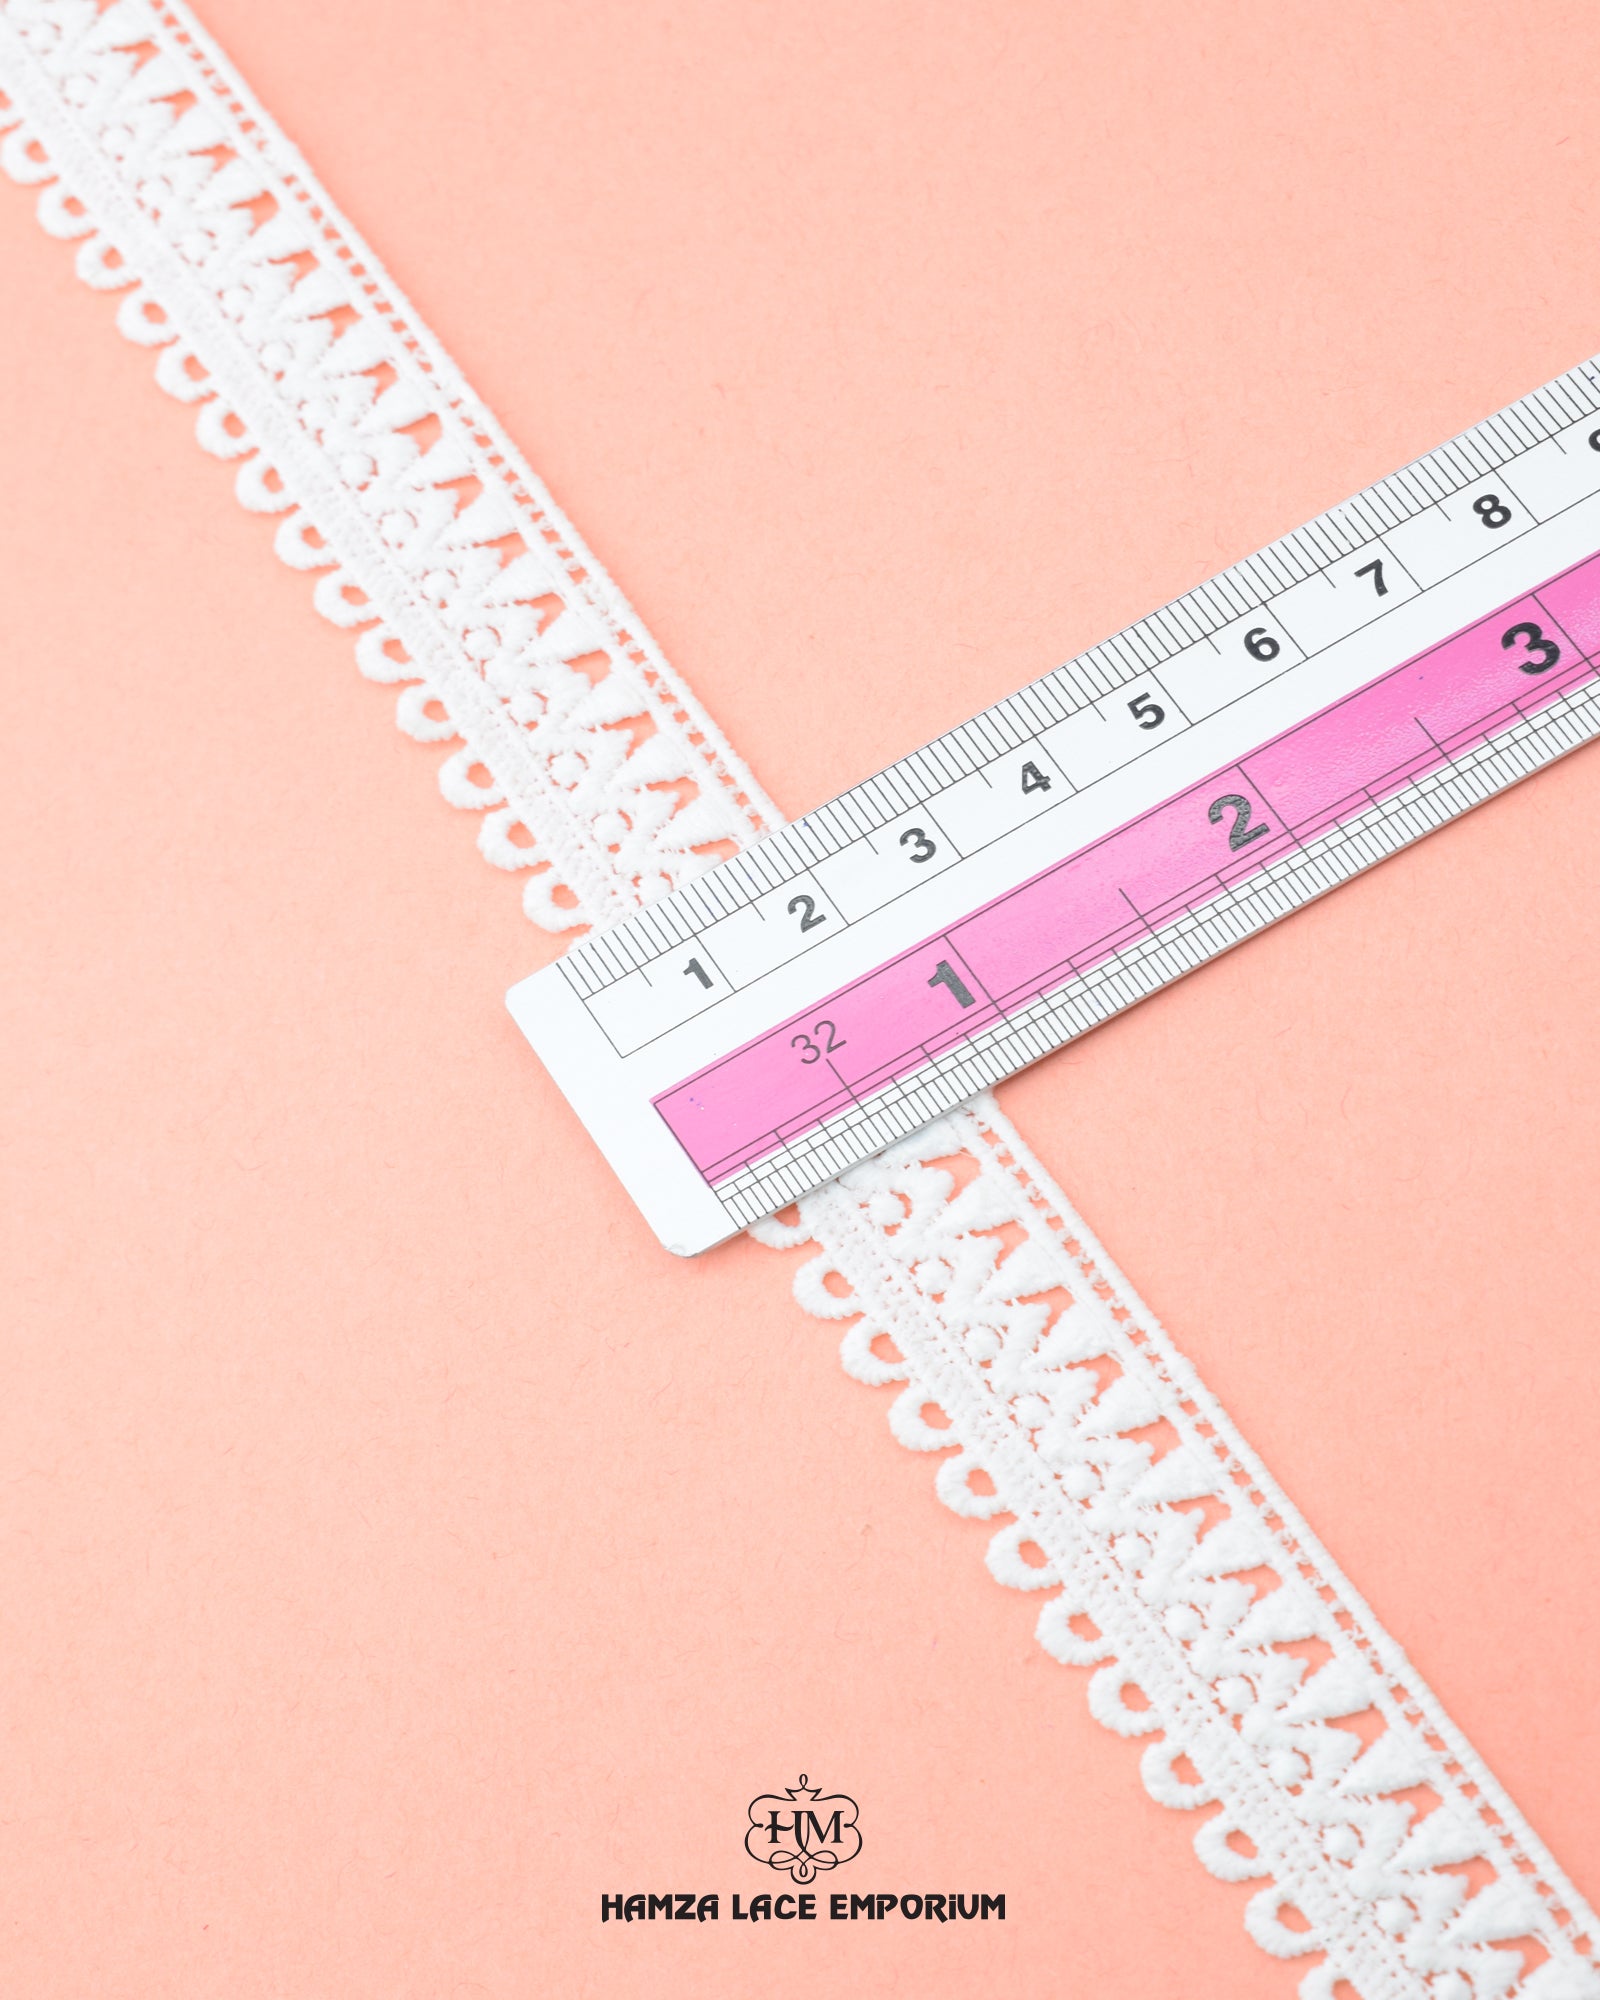 Size of the 'Edging Lace 22370' is shown as '0.5' inches with the help of a ruler